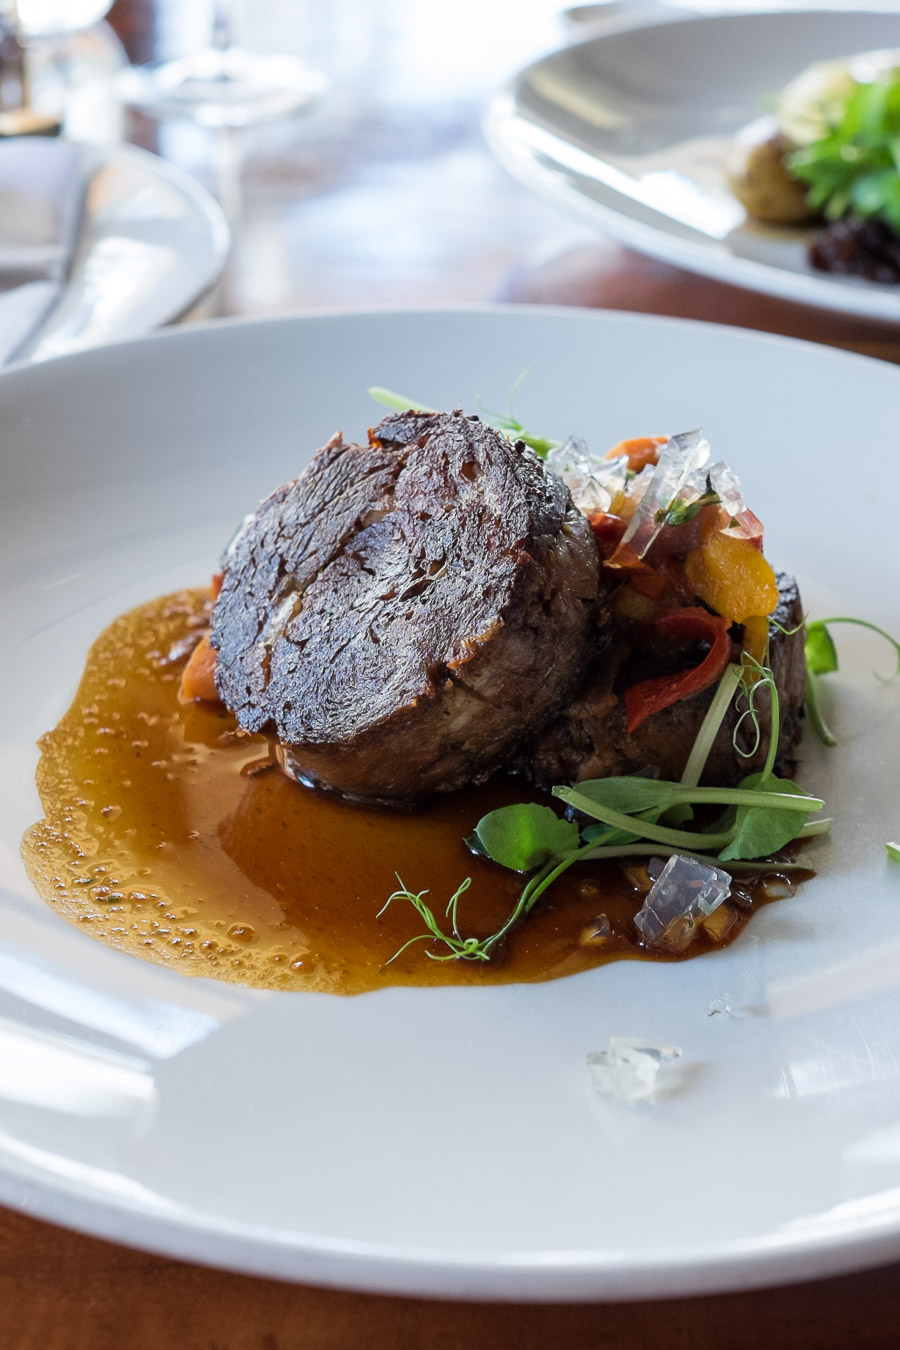 Avon Valley lamb (AU$44) - braised shoulder with eggplant caponata and river mint jelly.